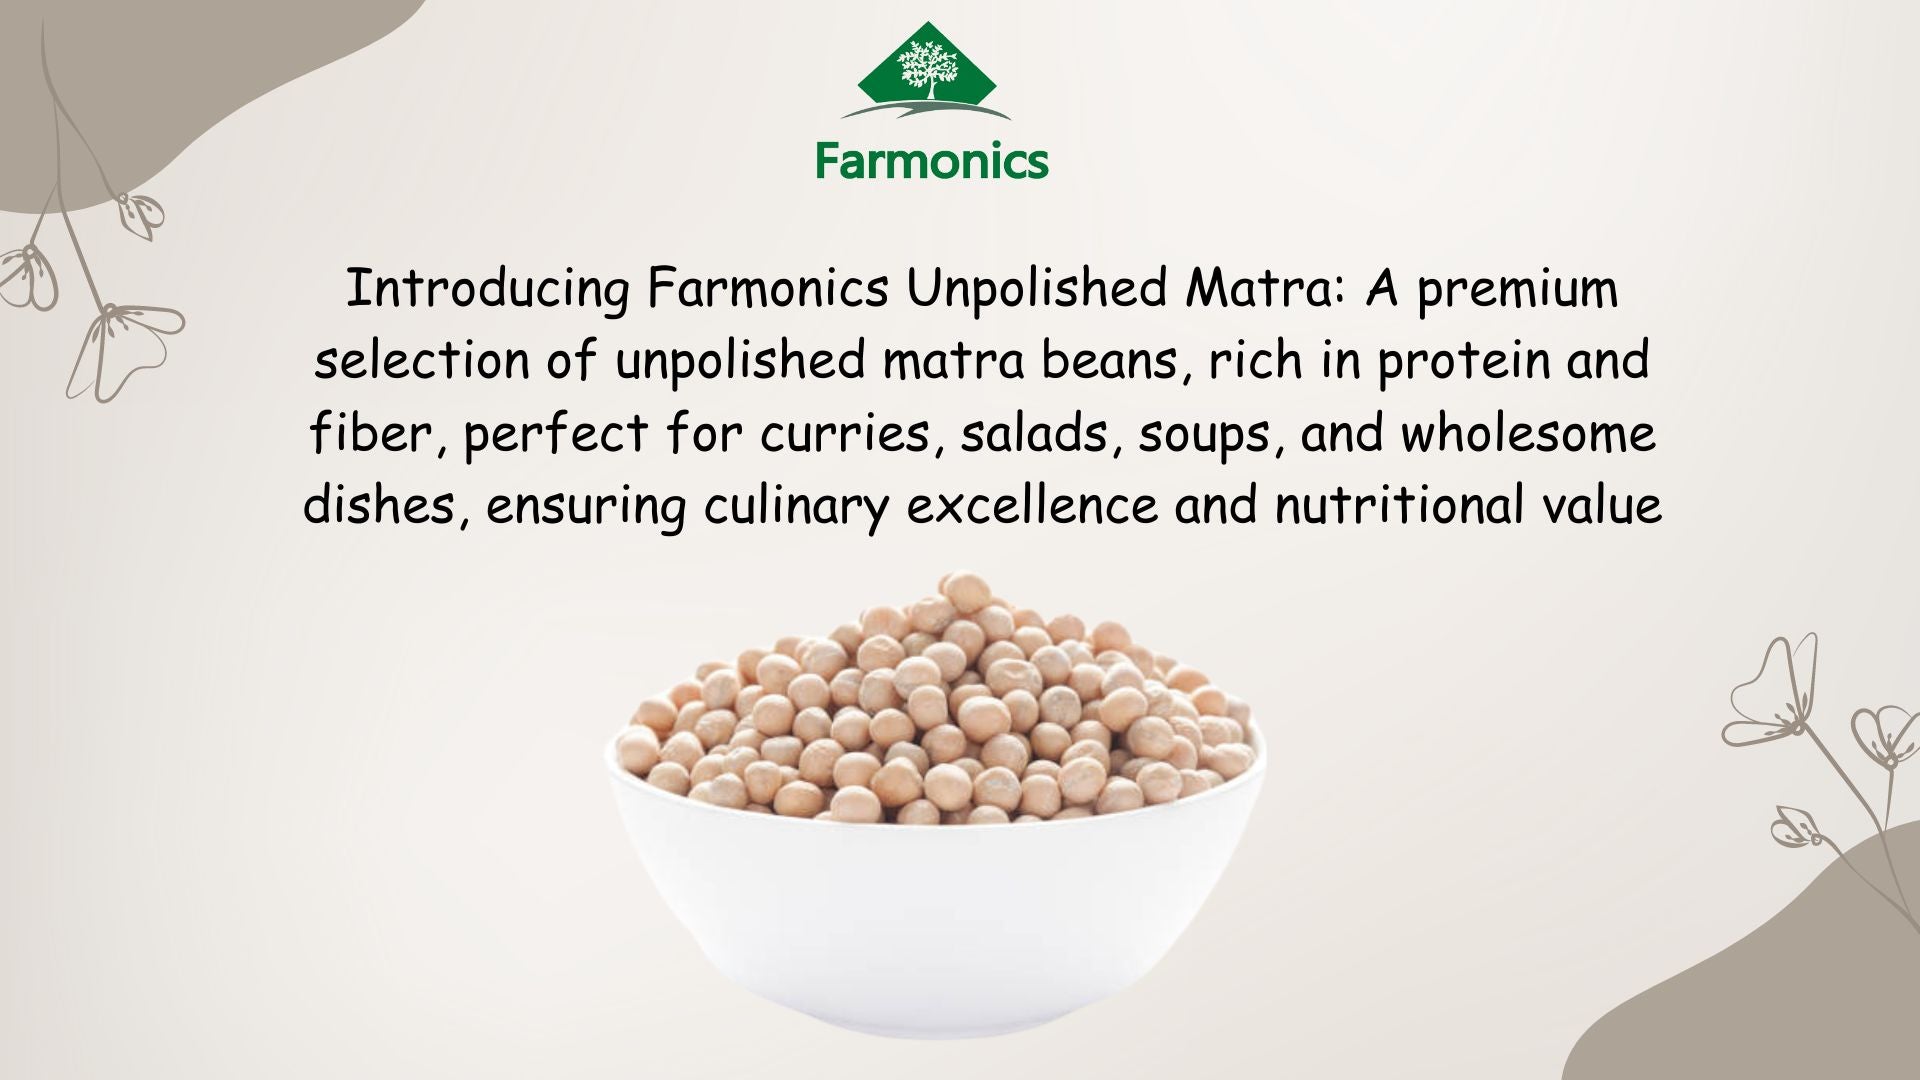 Here are some of the information about farmonics premioum quality   matra